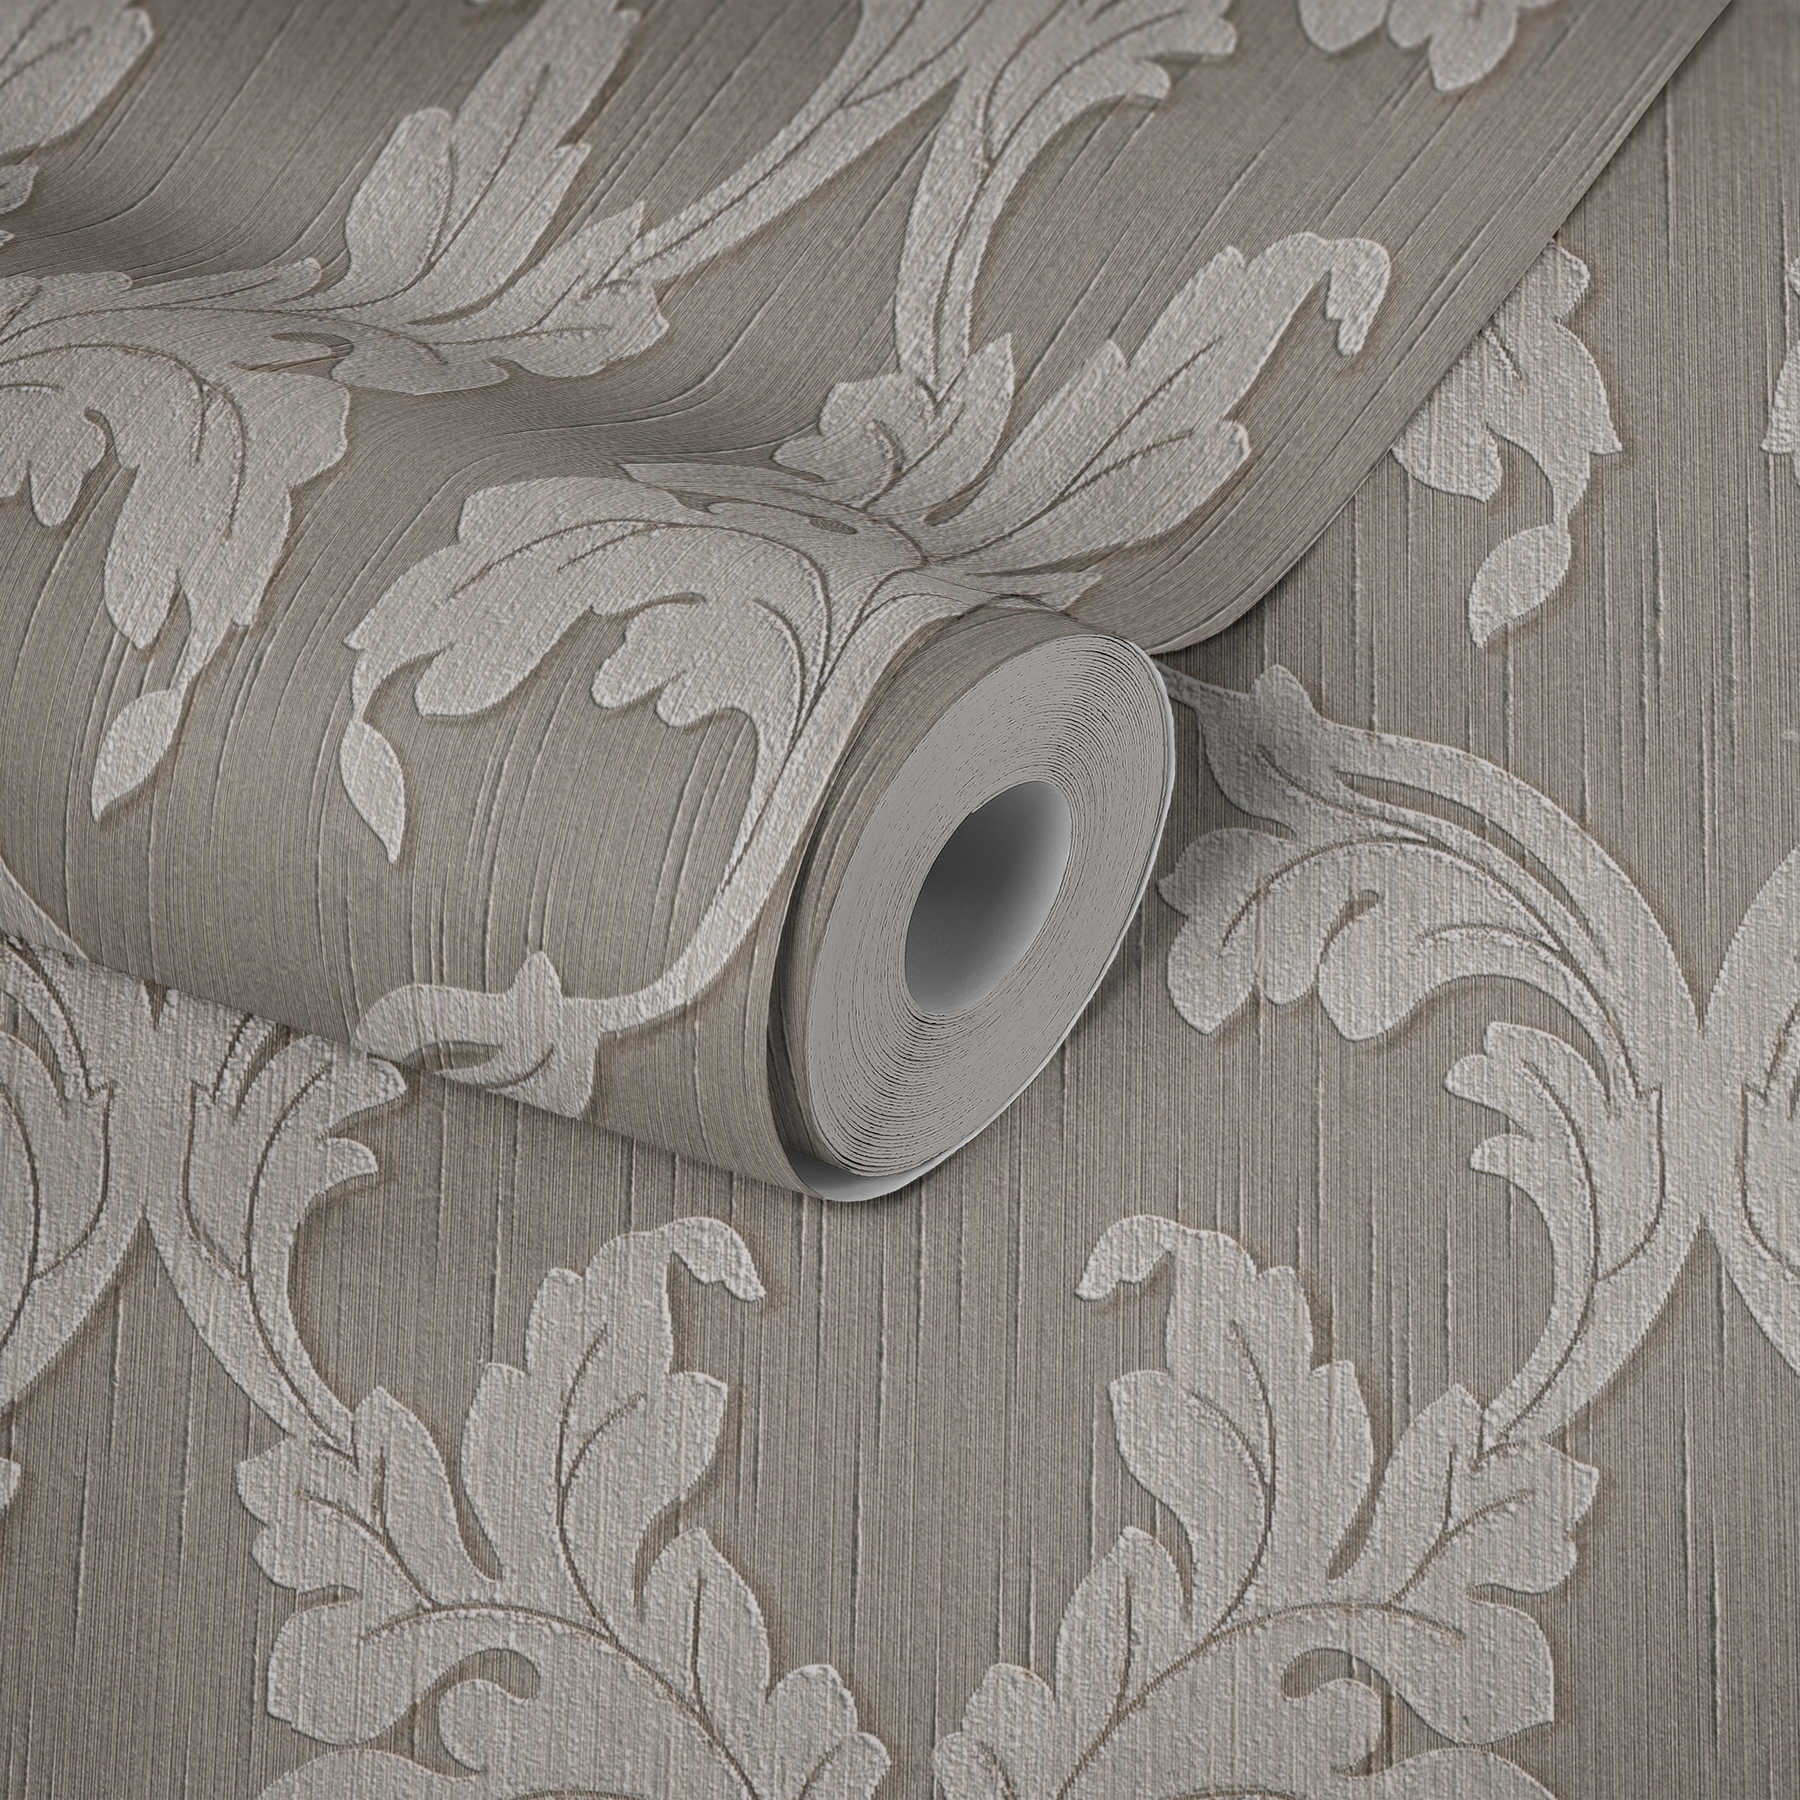             Baroque wallpaper with floral tendrils ornaments - grey, beige
        